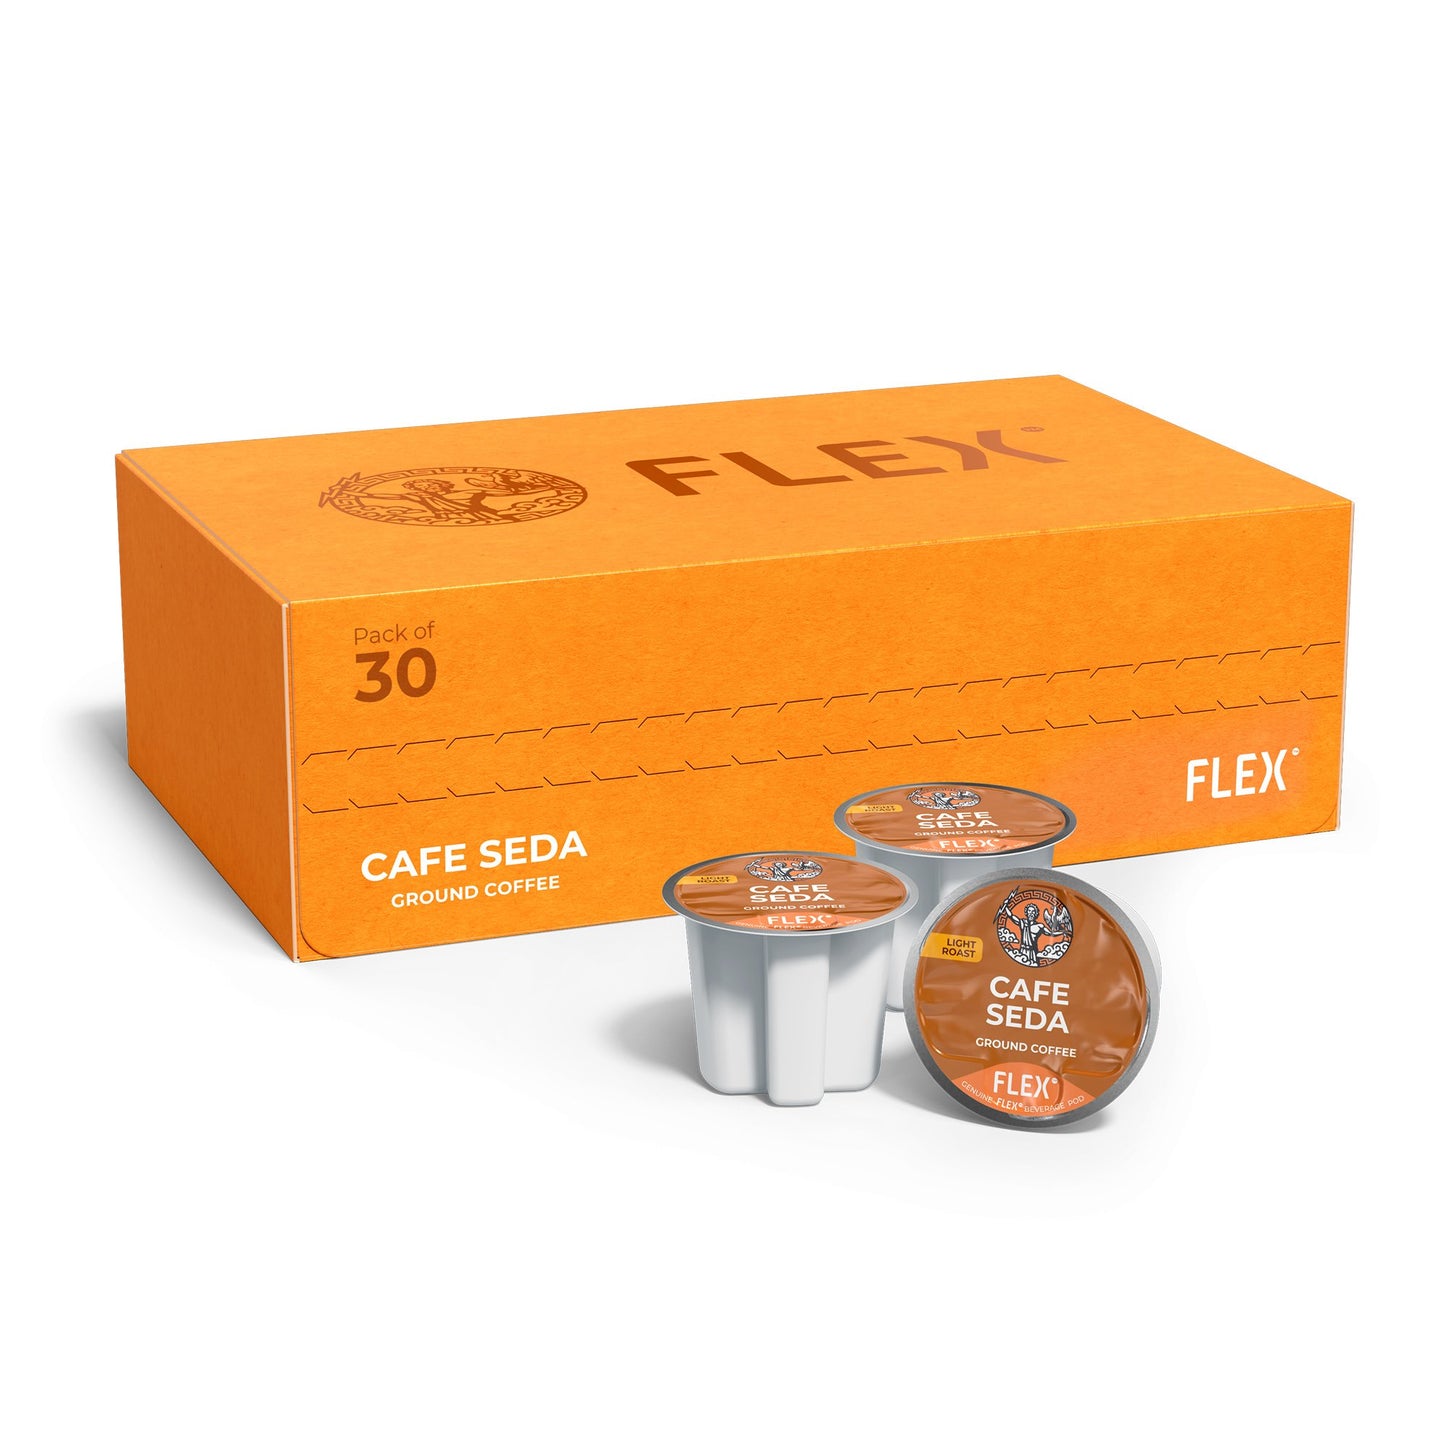 Box for a pack of 30 FLEXFUEL™ Café Seda Light Roast Ground Coffee pods, showcasing a warm brown background with a red tab indicating 'LIGHT ROAST' and the classic FLEX logo of Zeus and an eagle, signifying a smooth and light-bodied coffee experience.